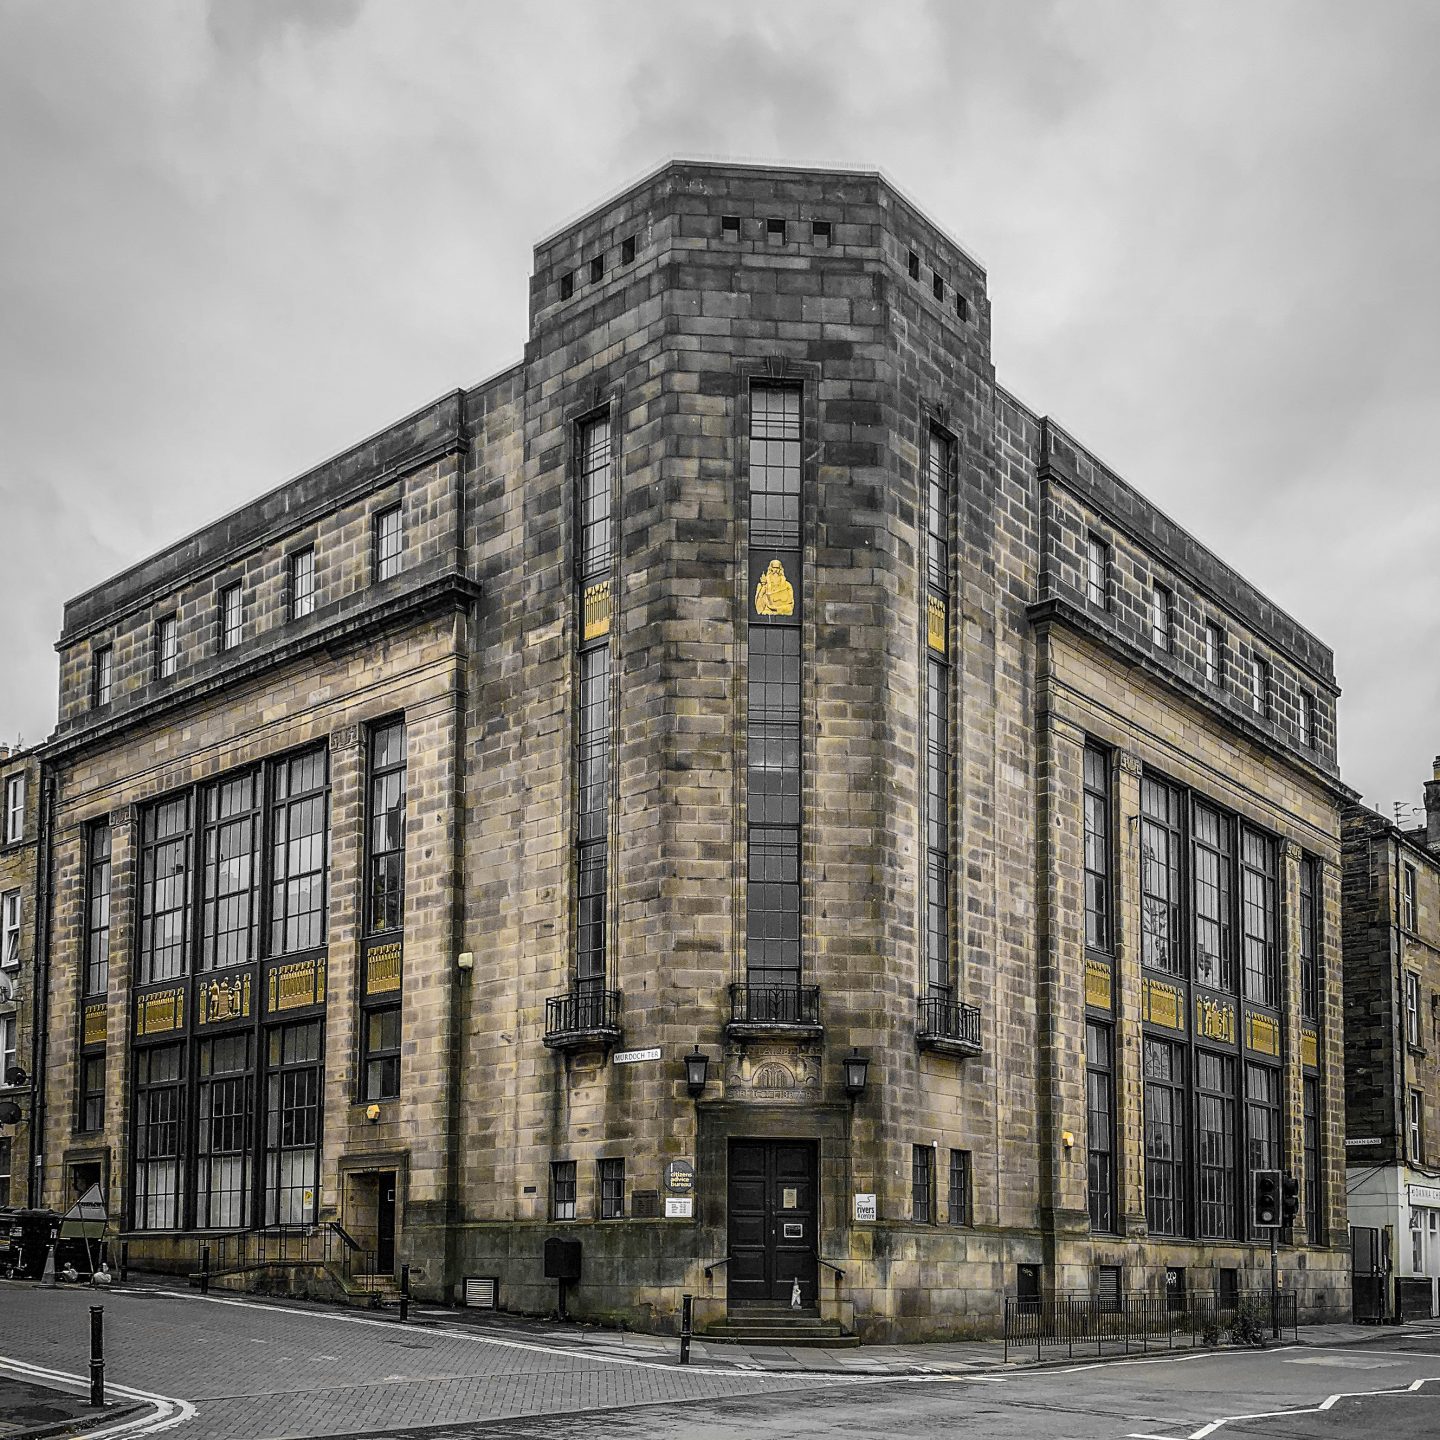 90 for 90: Fountainbridge Library and the Building Centre